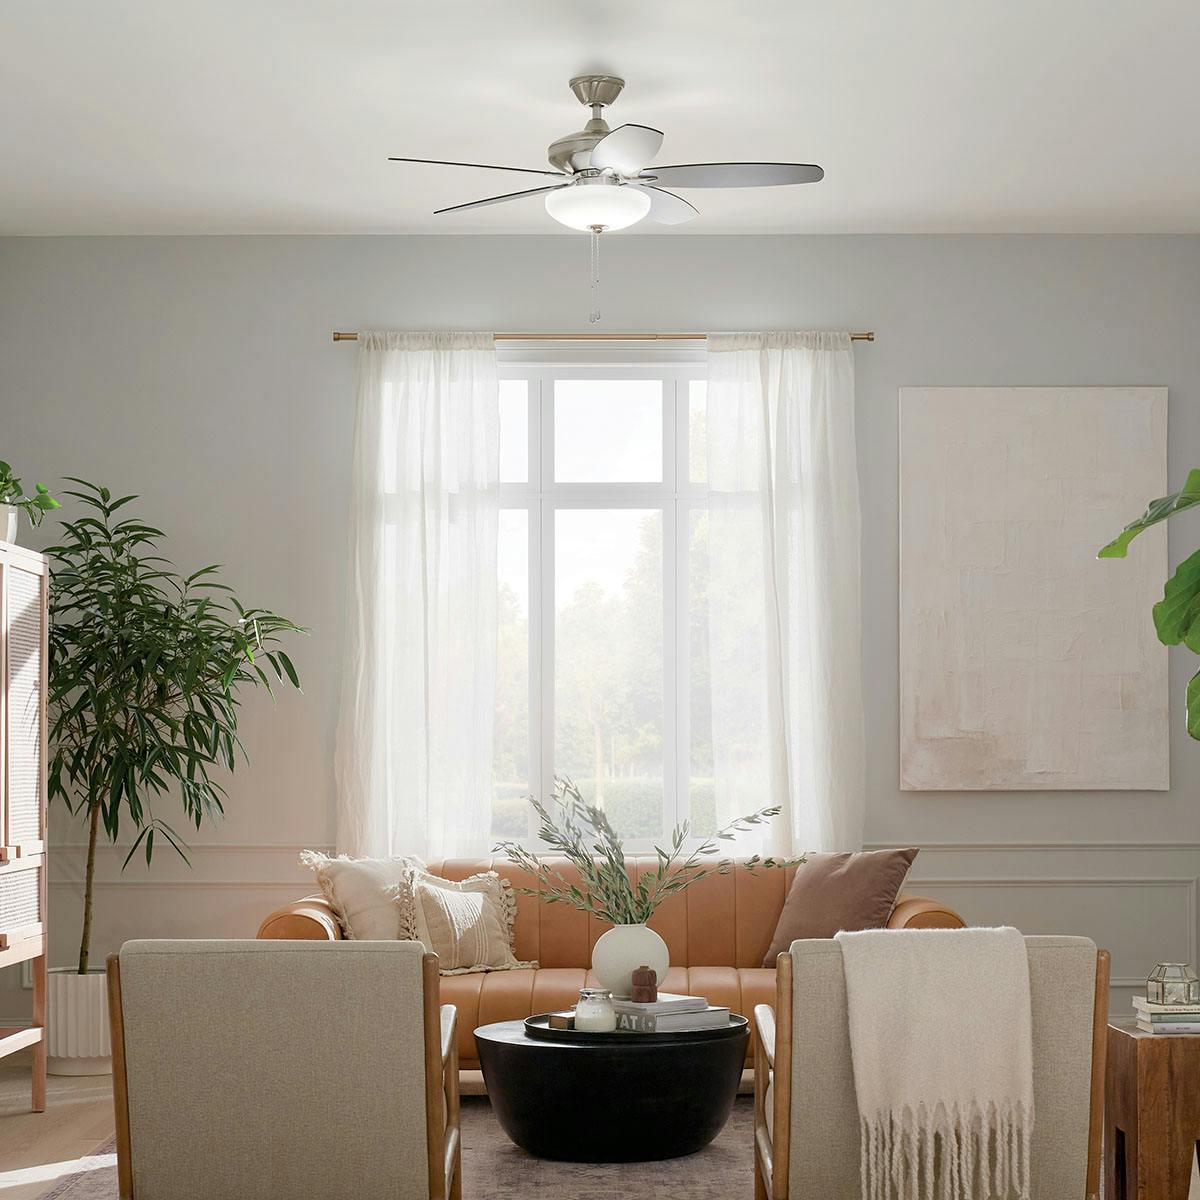 Day time living room featuring Renew ceiling fan 330161BSS